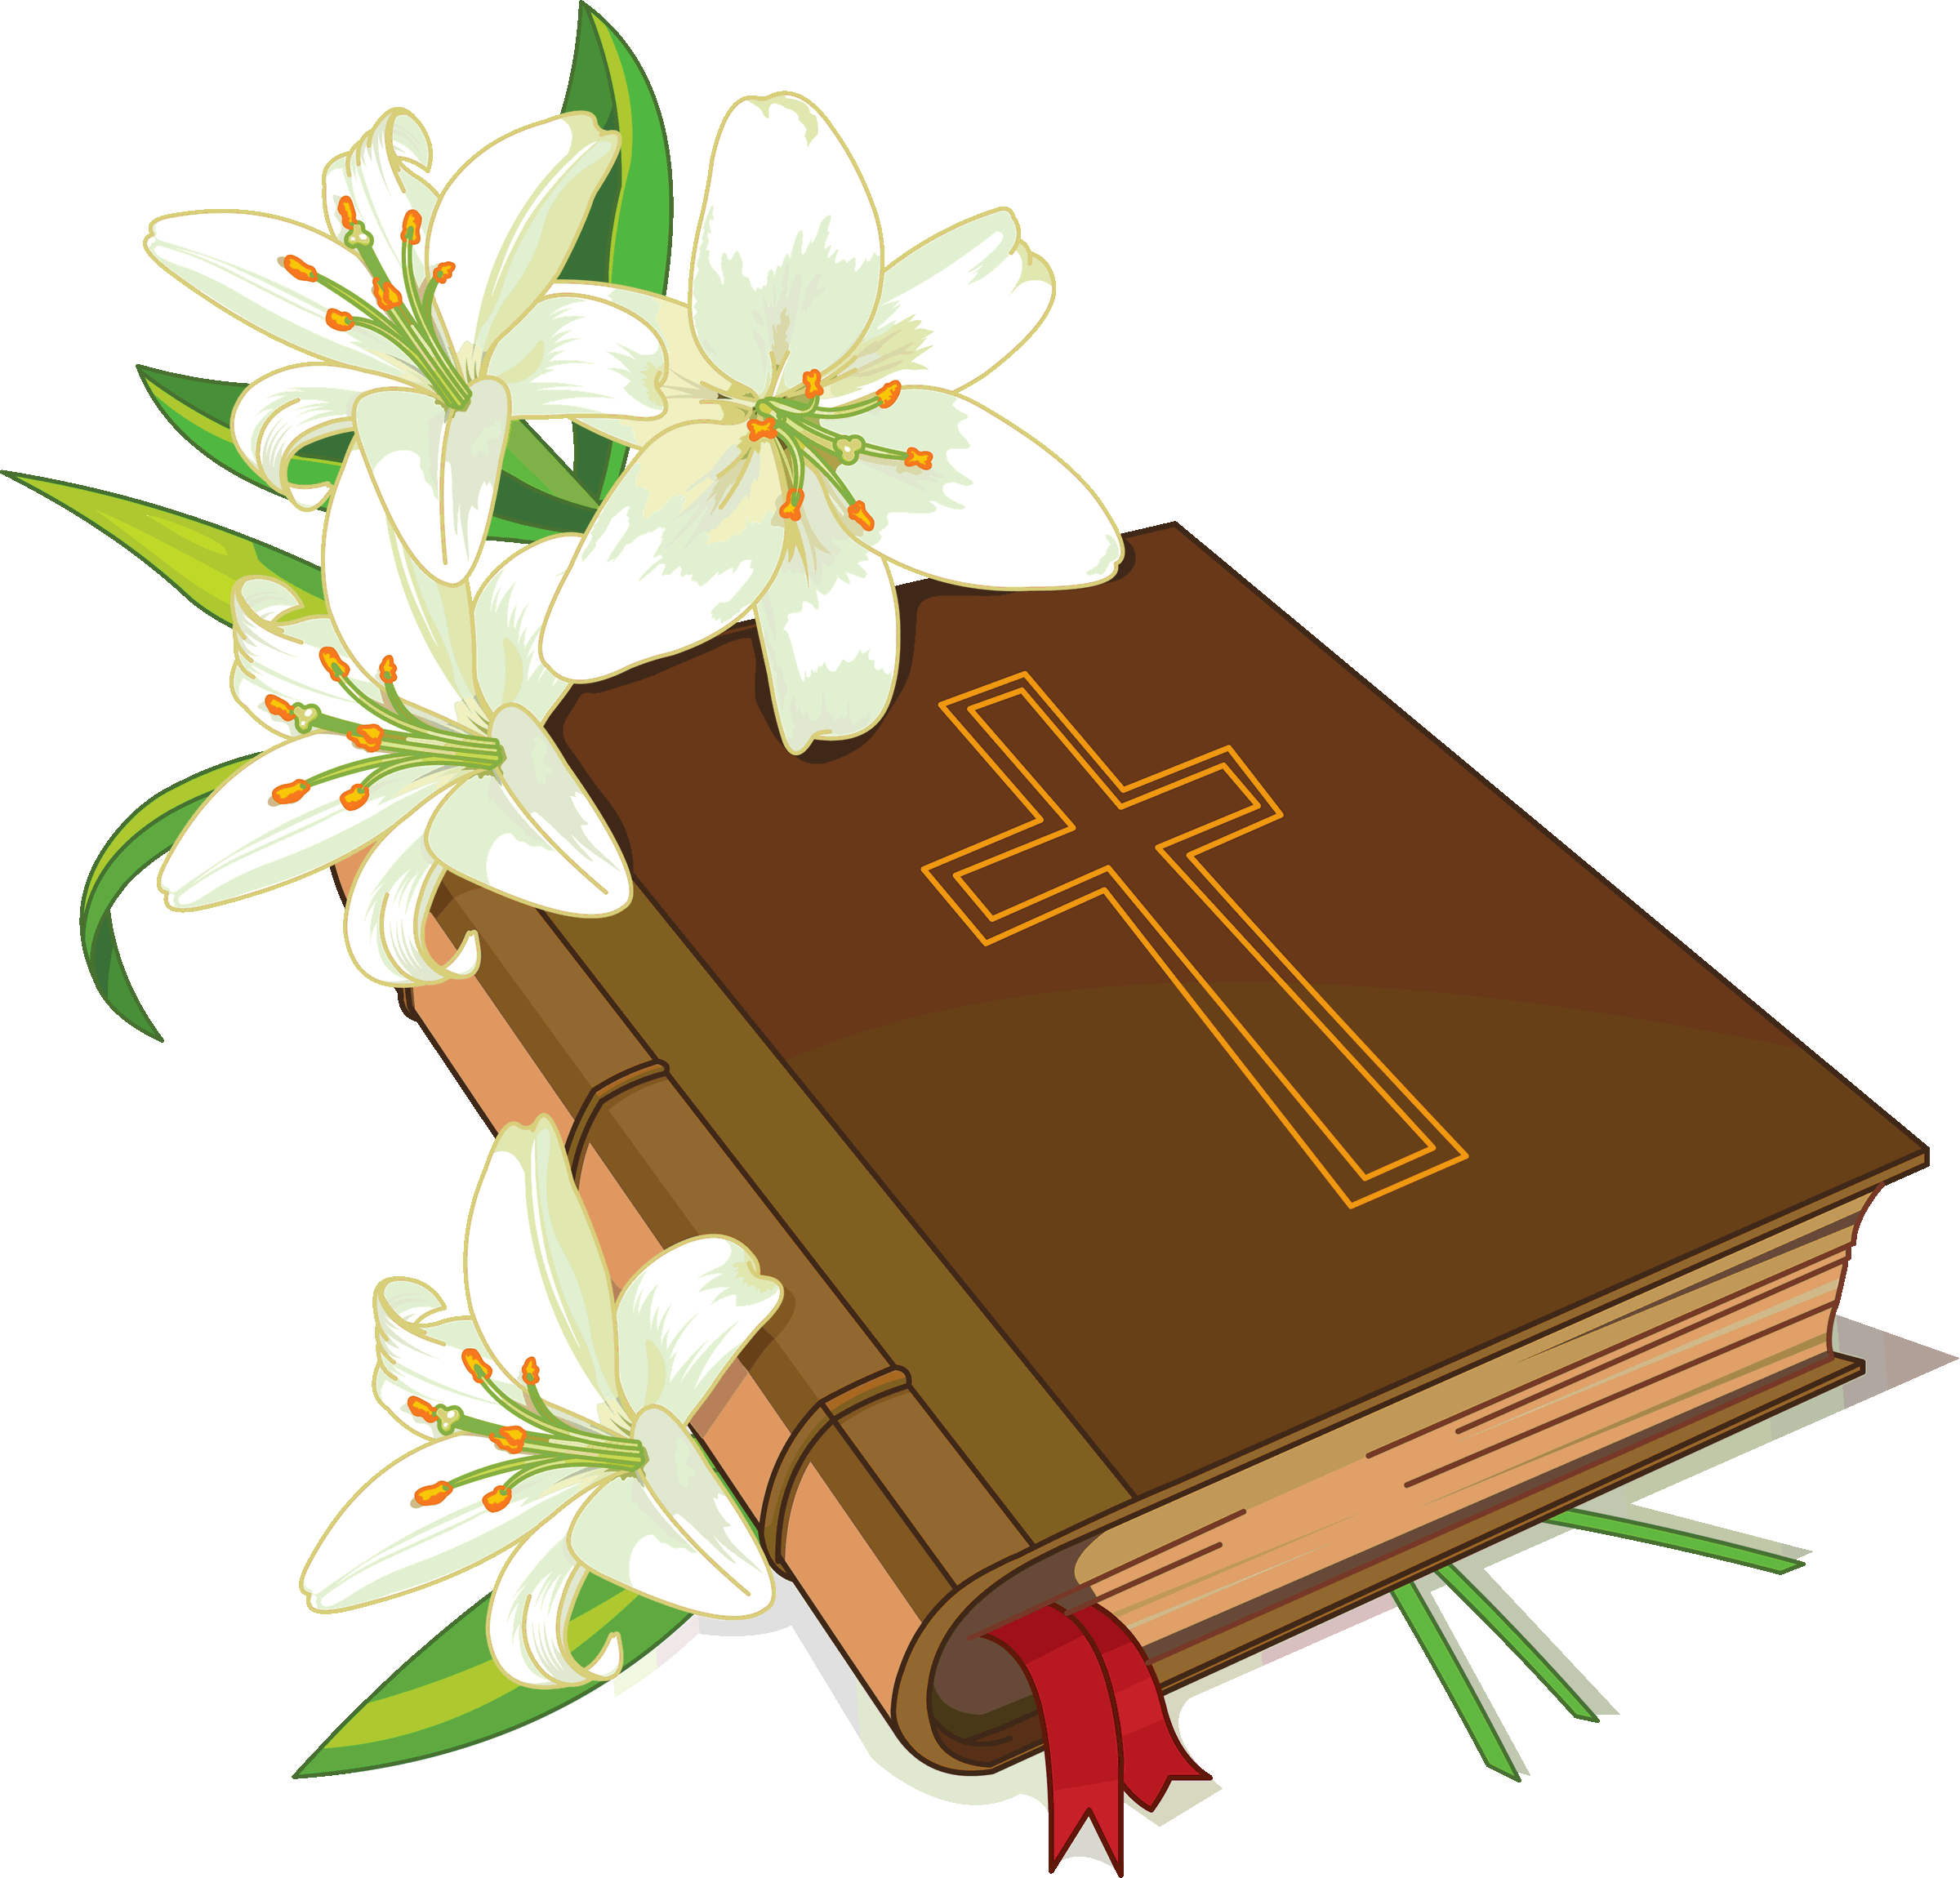 christian-bible-and-flowers-clipart-clipartcow-clipartix